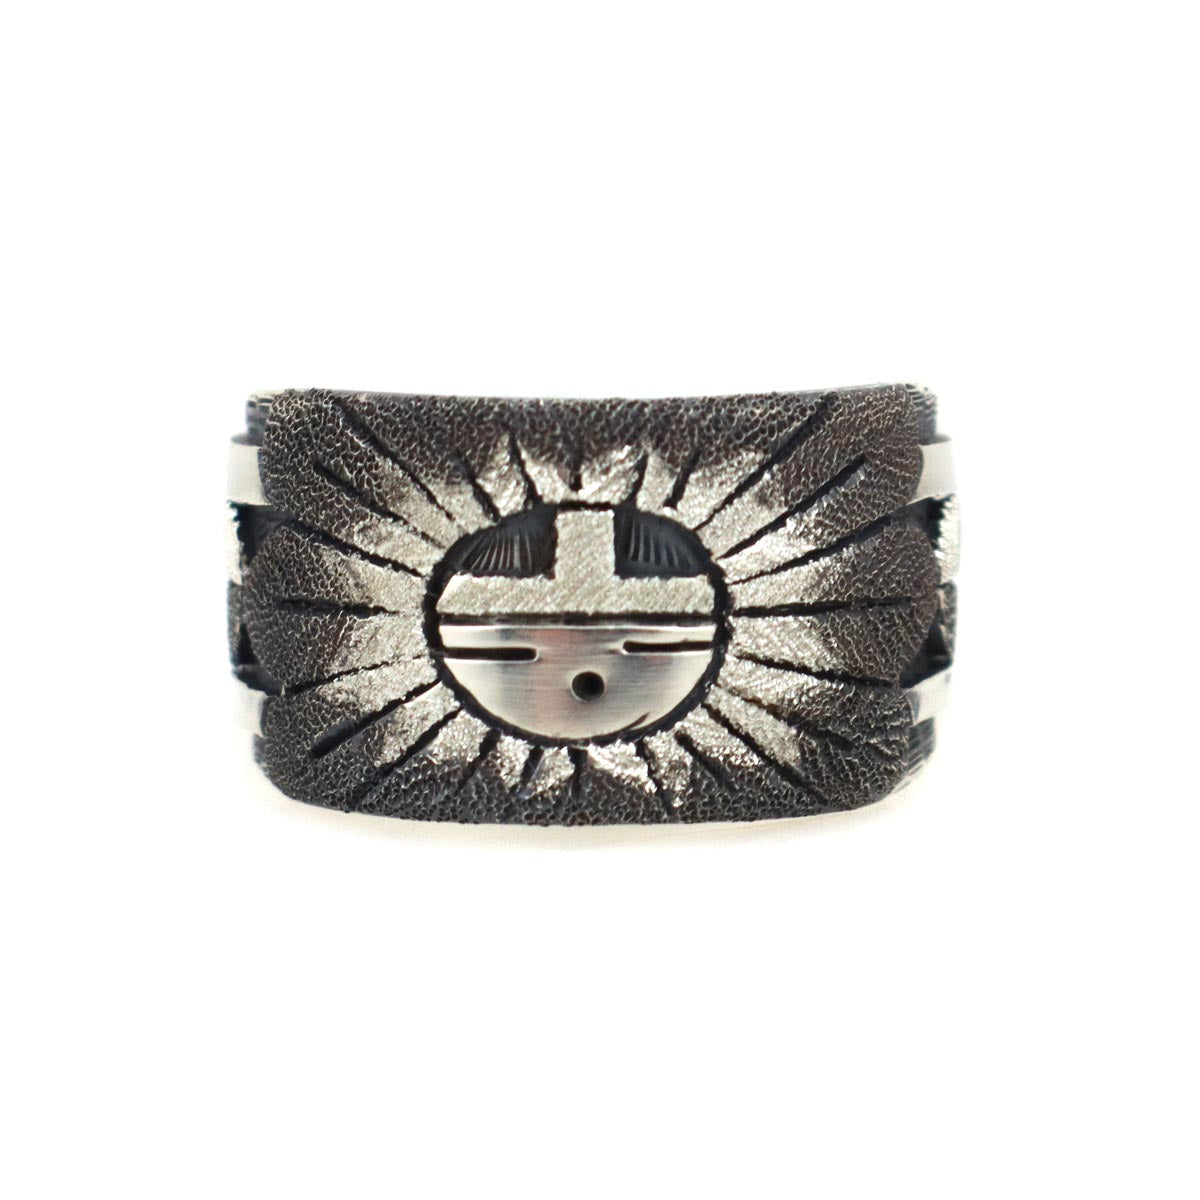 Ronald Wadsworth - Hopi Contemporary Sterling Silver Overlay Ring with Sunface Kachina Design, size 9.75 (J14772)